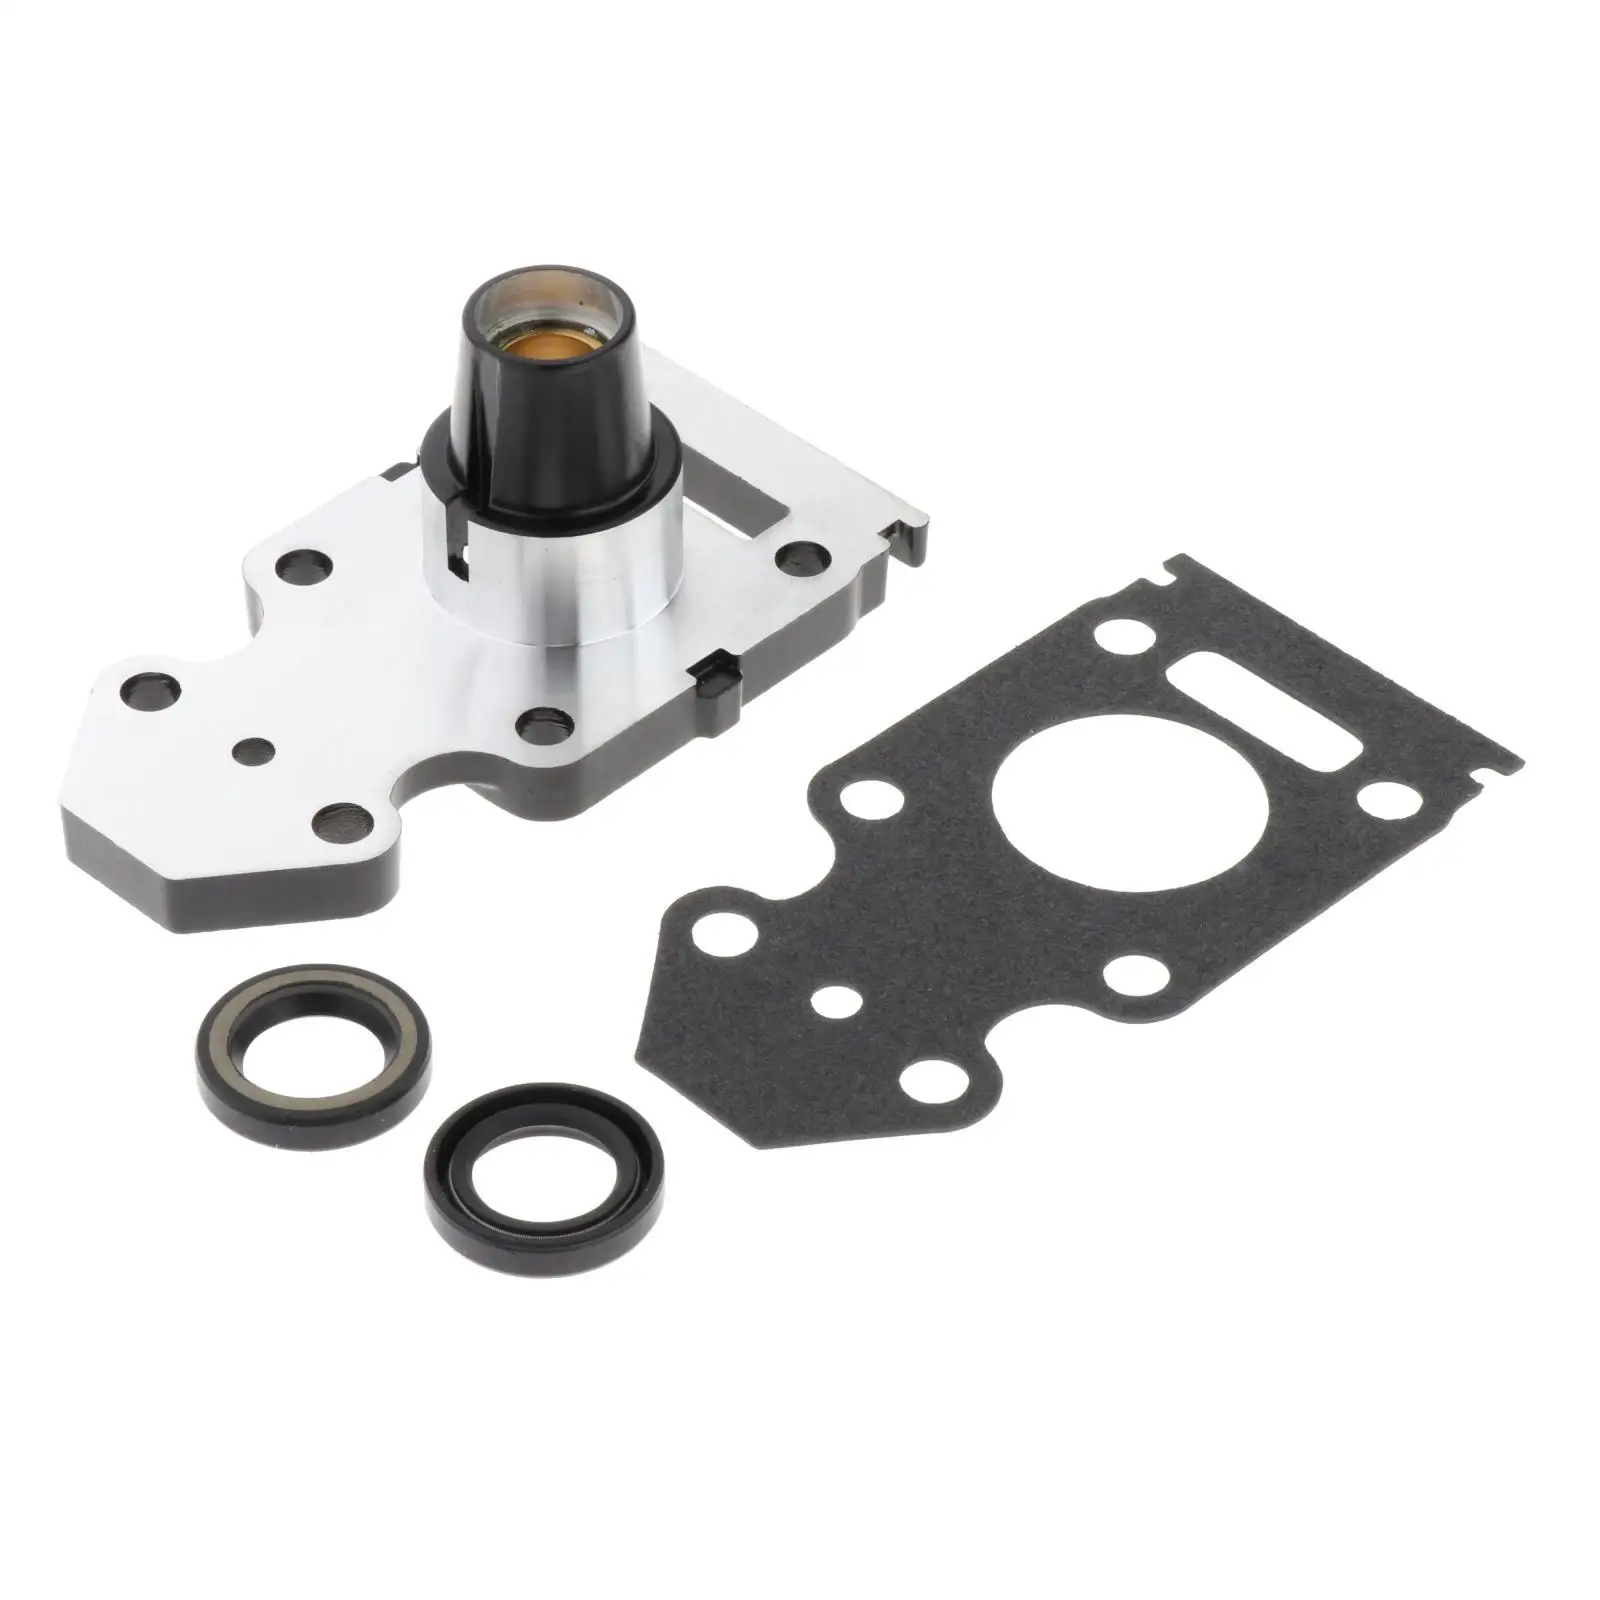 Housing Kit F15-06020001 Engine Fit for  Outboard 9.9 15HP  